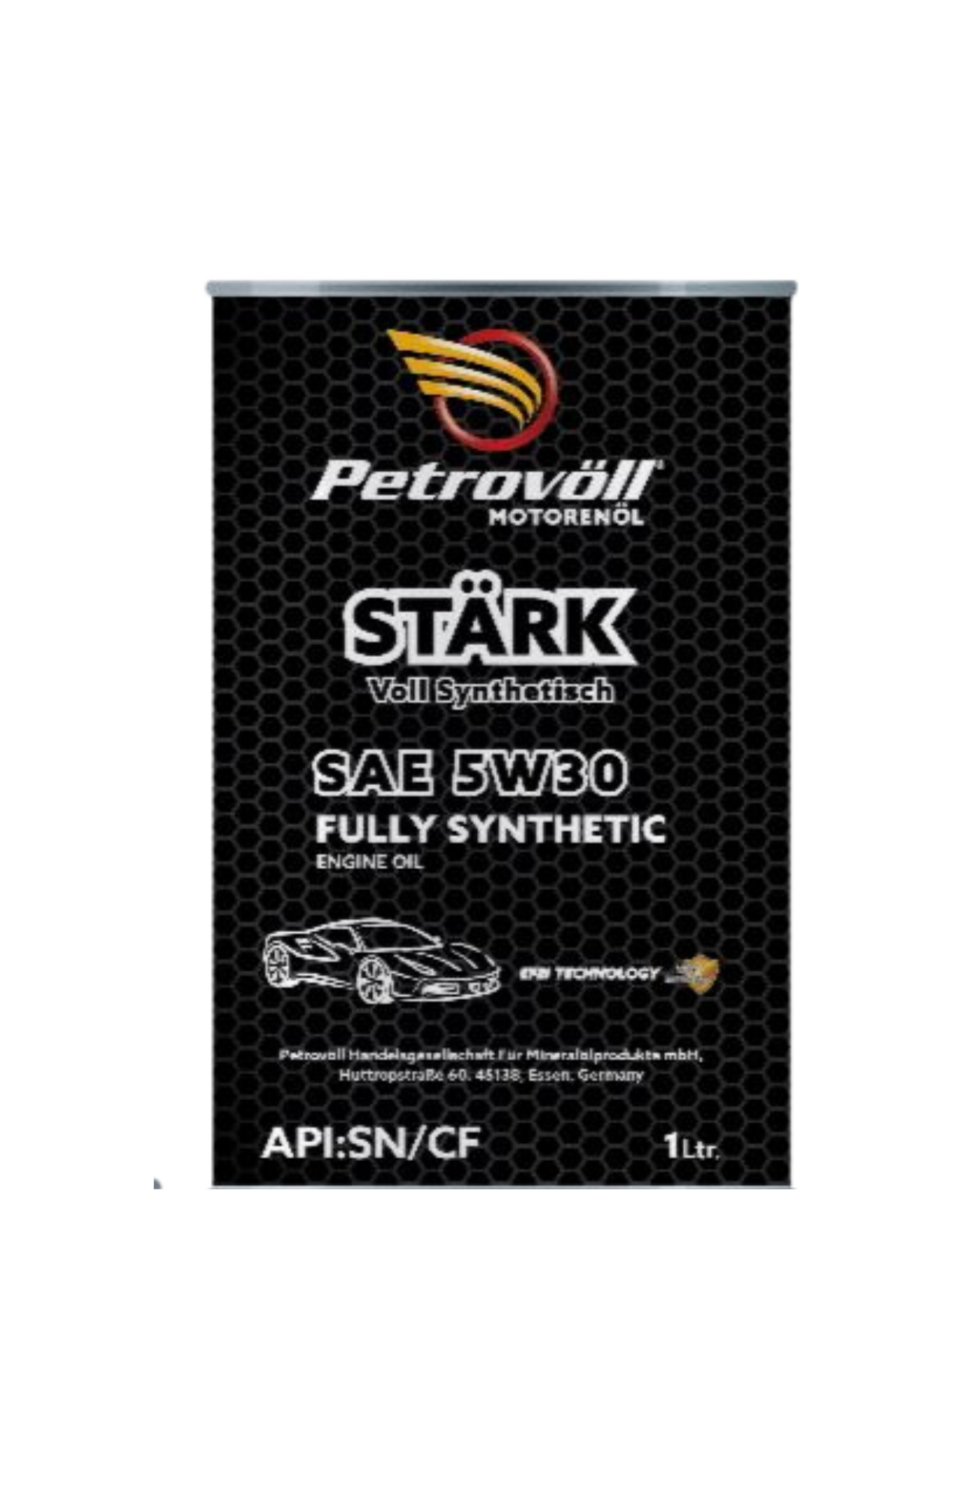 Petrovoll 5w30 SN/CF Full Synthetic (METAL), SIZE: 1L CAN